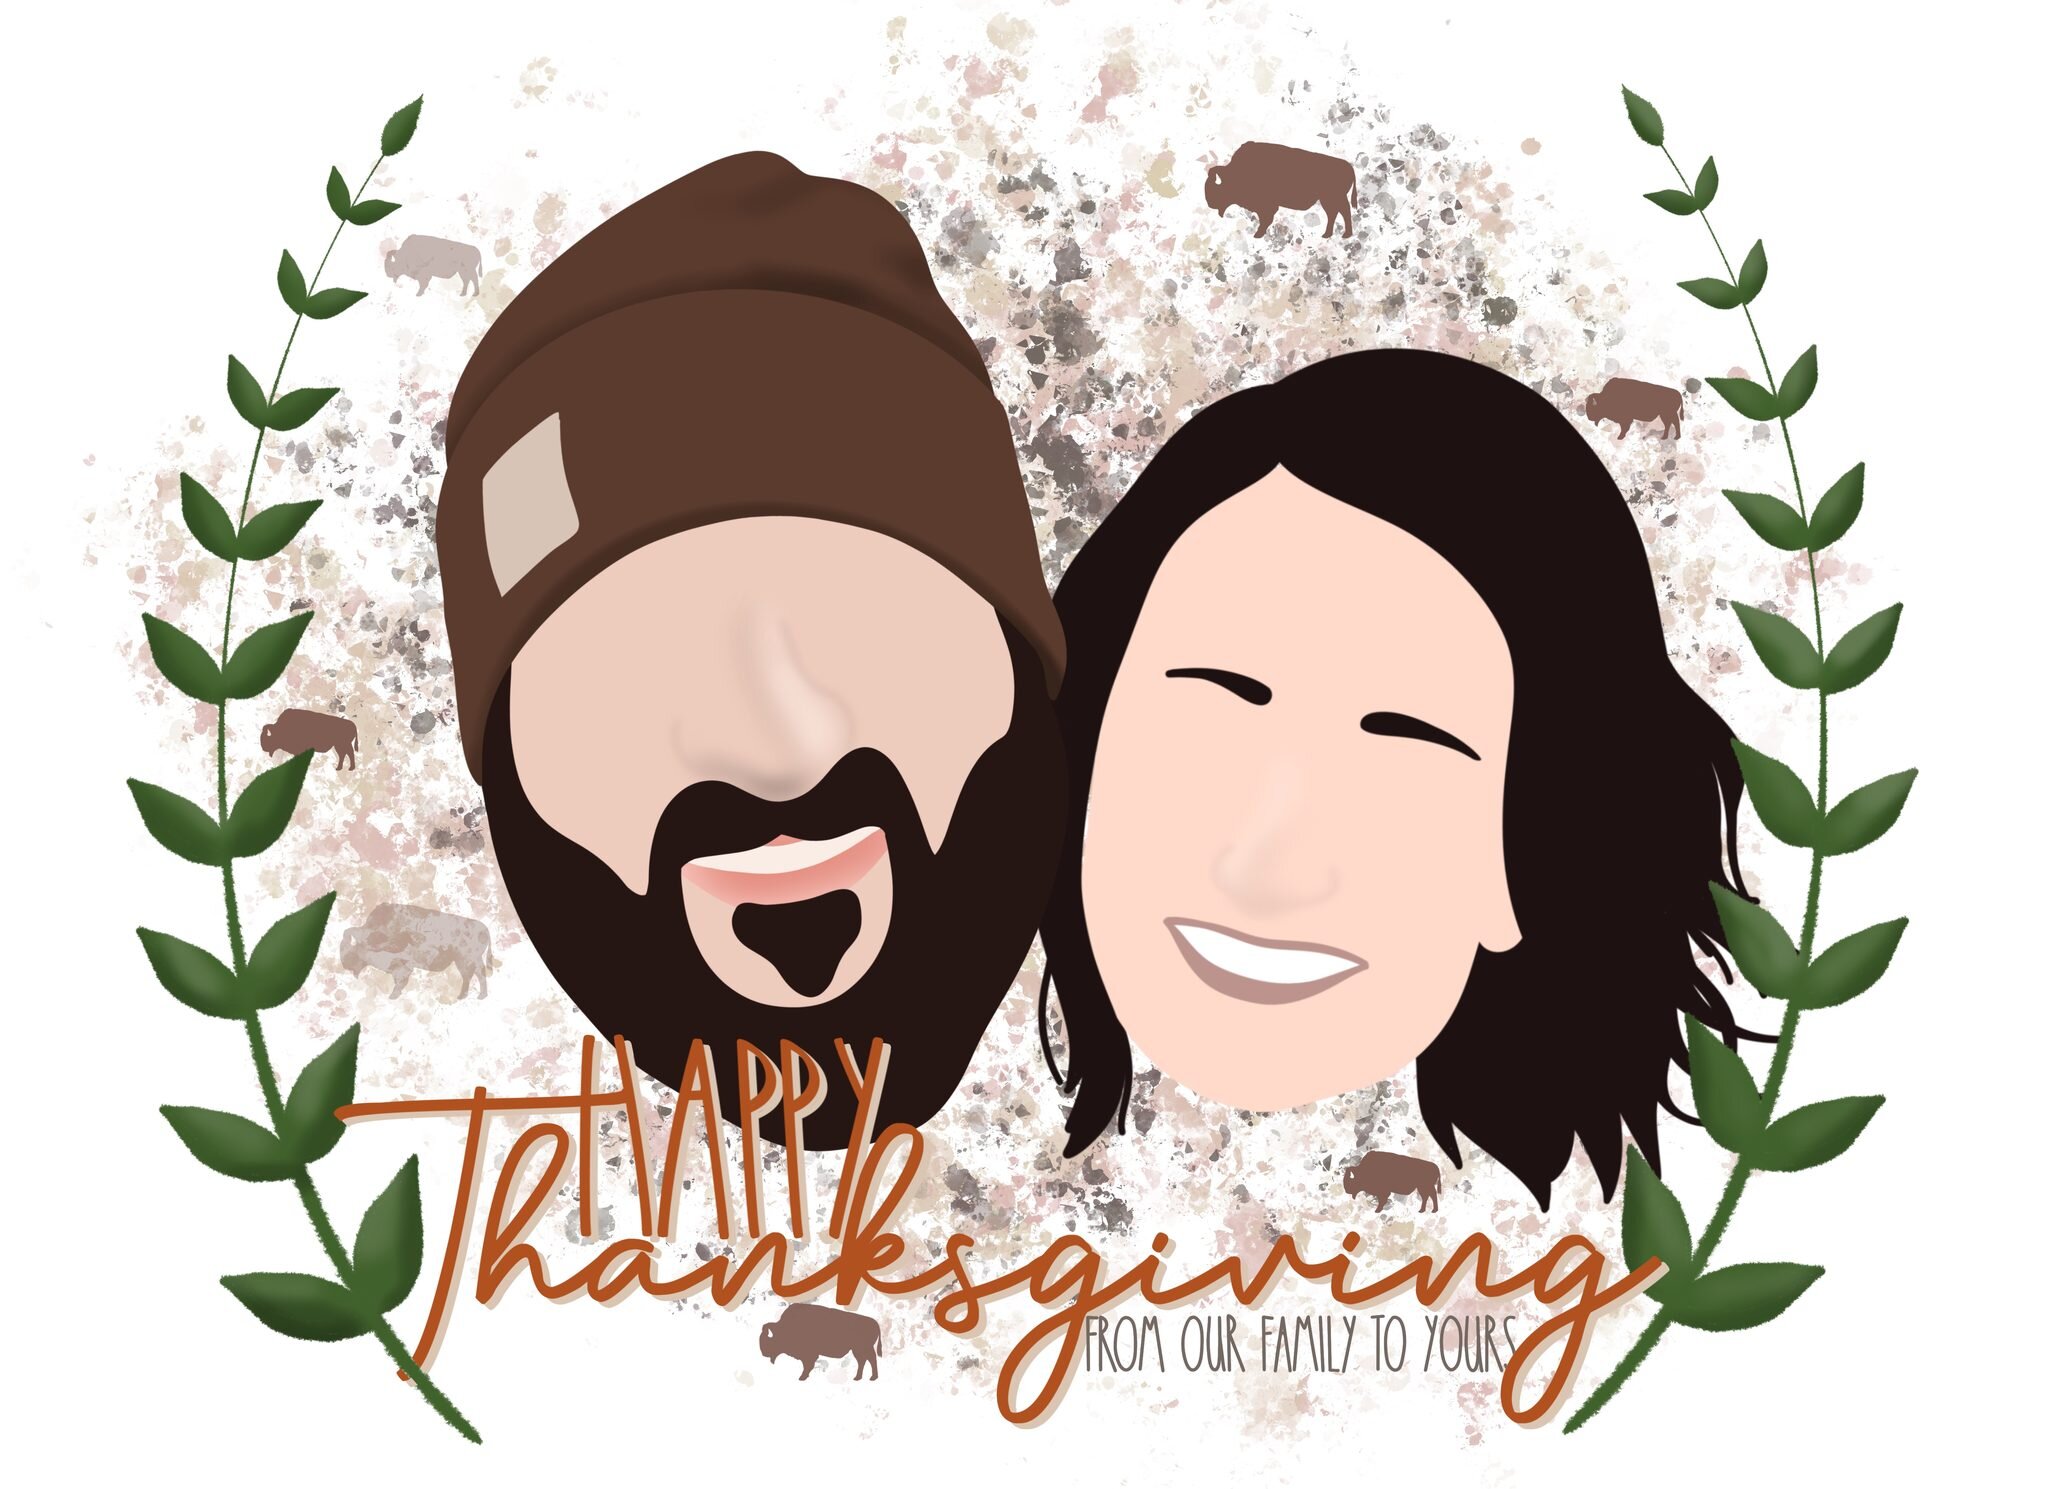 We're posting this week about things we're especially thankful for in 2022. 

On this beautiful Thanksgiving Day, Shawn and Carrie are SO thankful for each other, Shawnanigans, and the life we get to live as small business owners. We are blessed to g